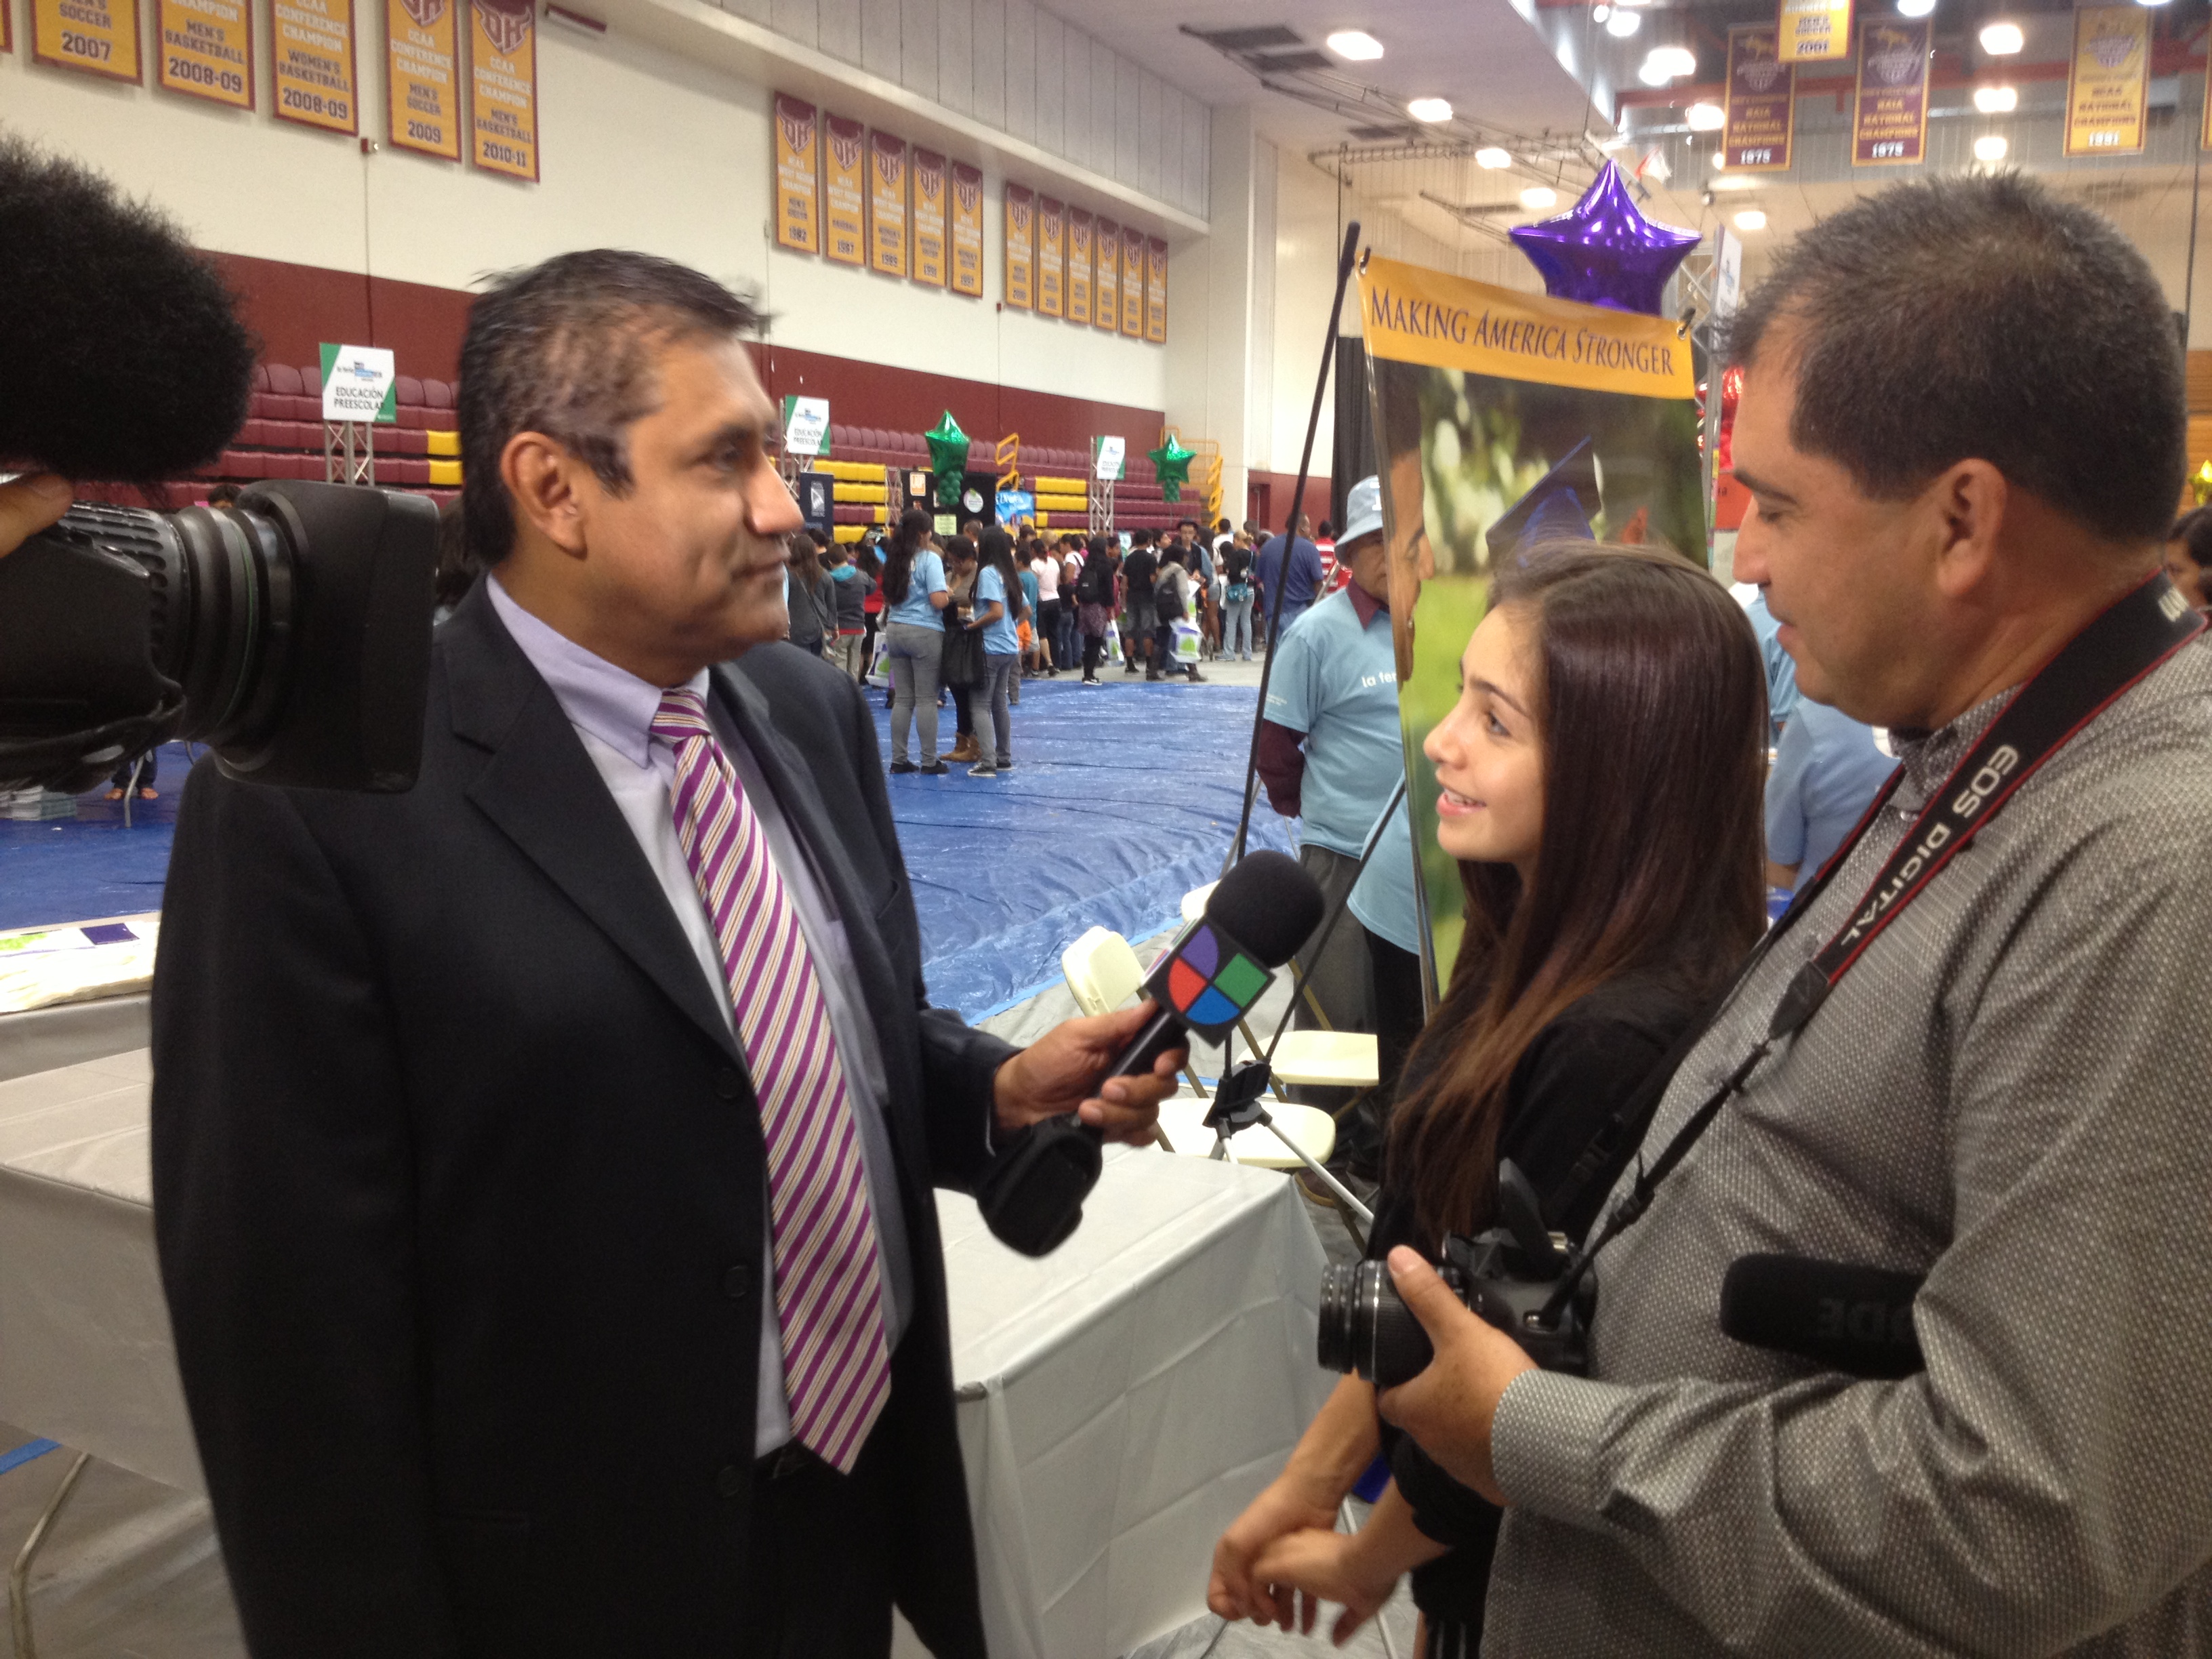 Samantha being interviewed by Univision after performing for them at a festival.